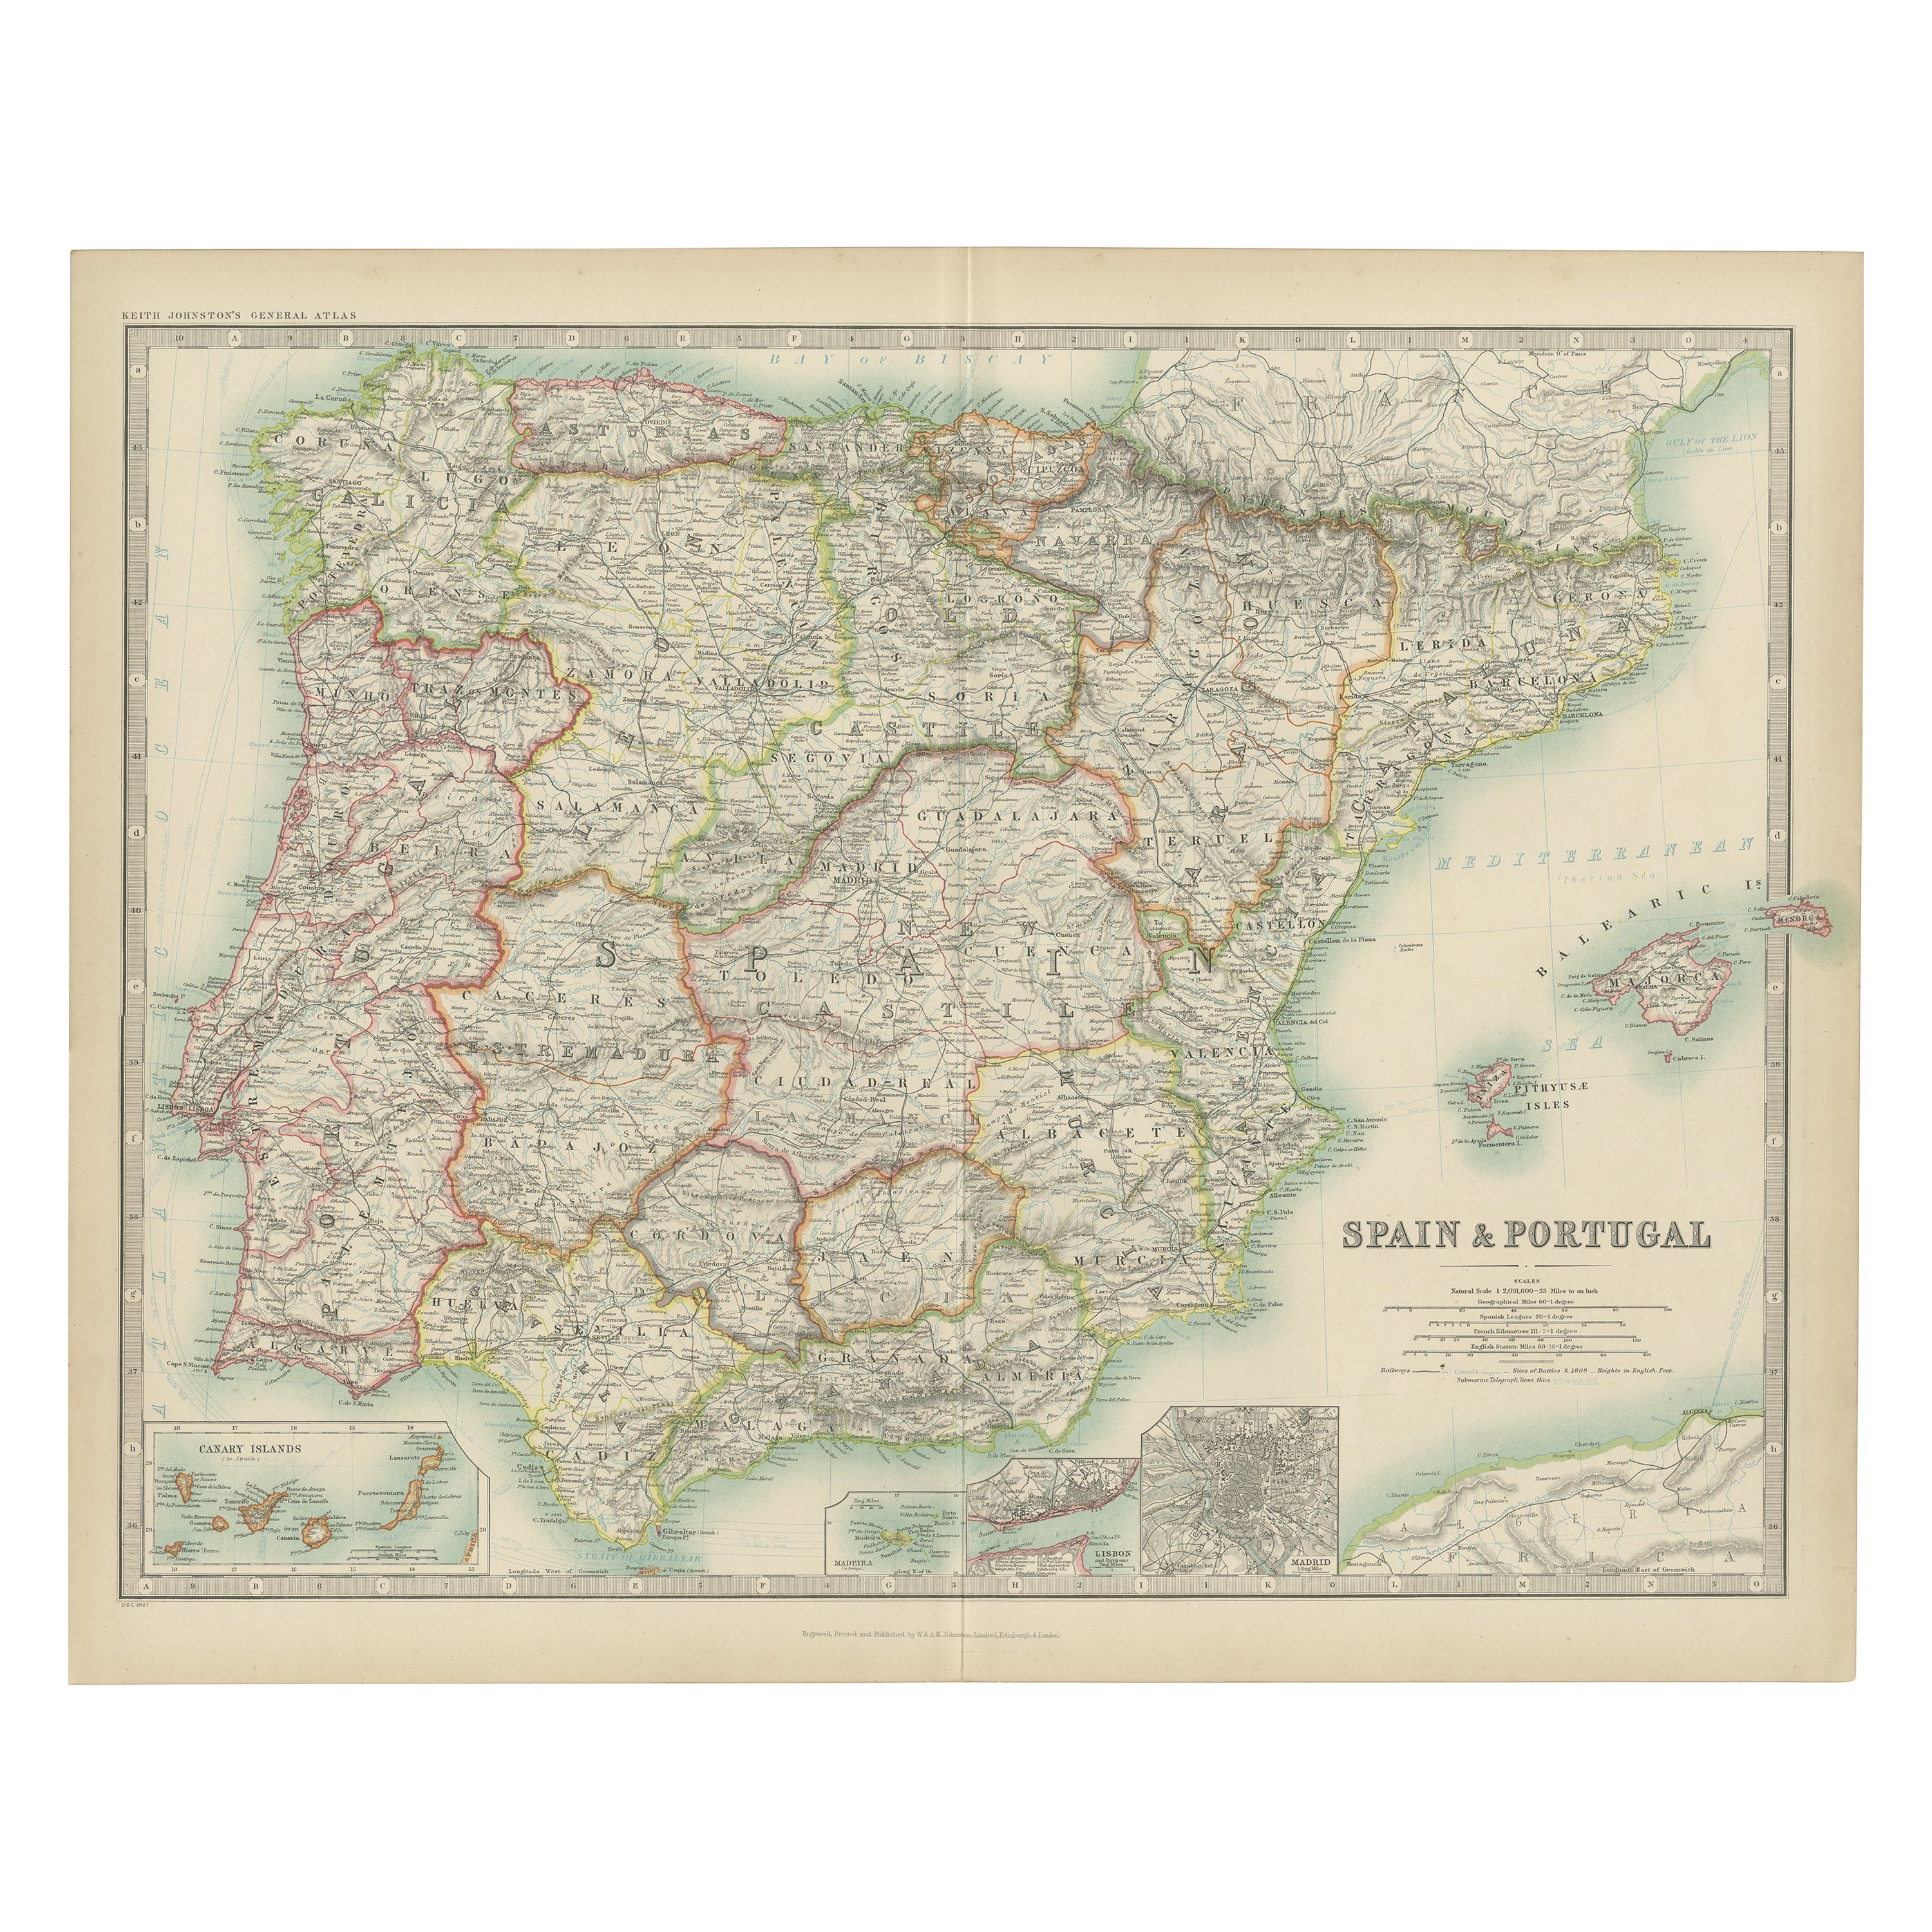 Antique Map of Spain and Portugal by Johnston, '1909'